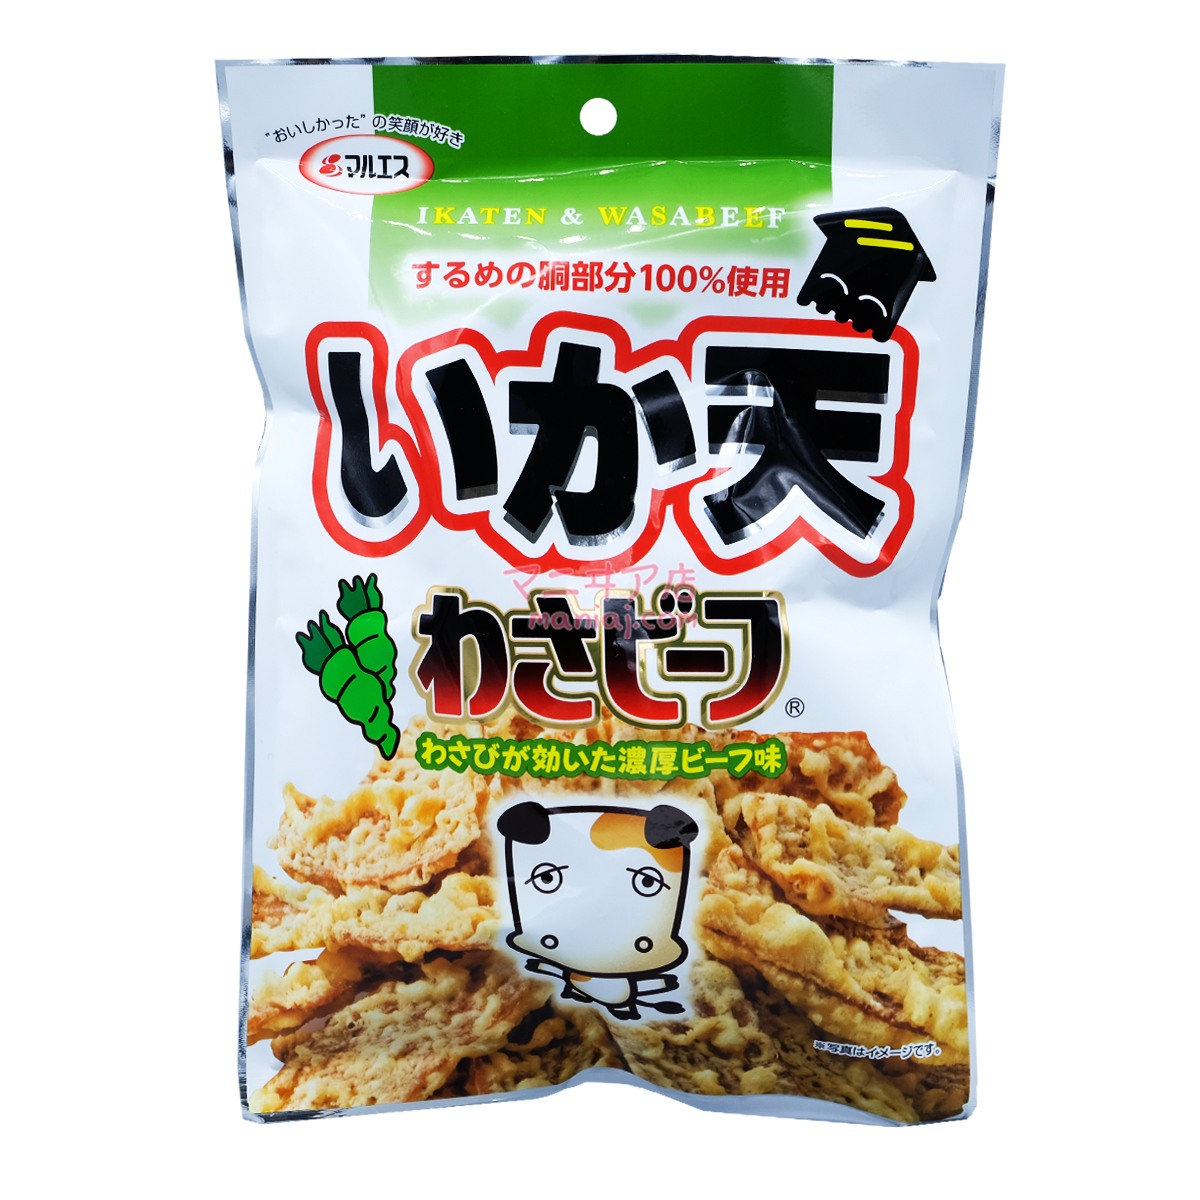 Wasabi Beef Flavored Squid Chips